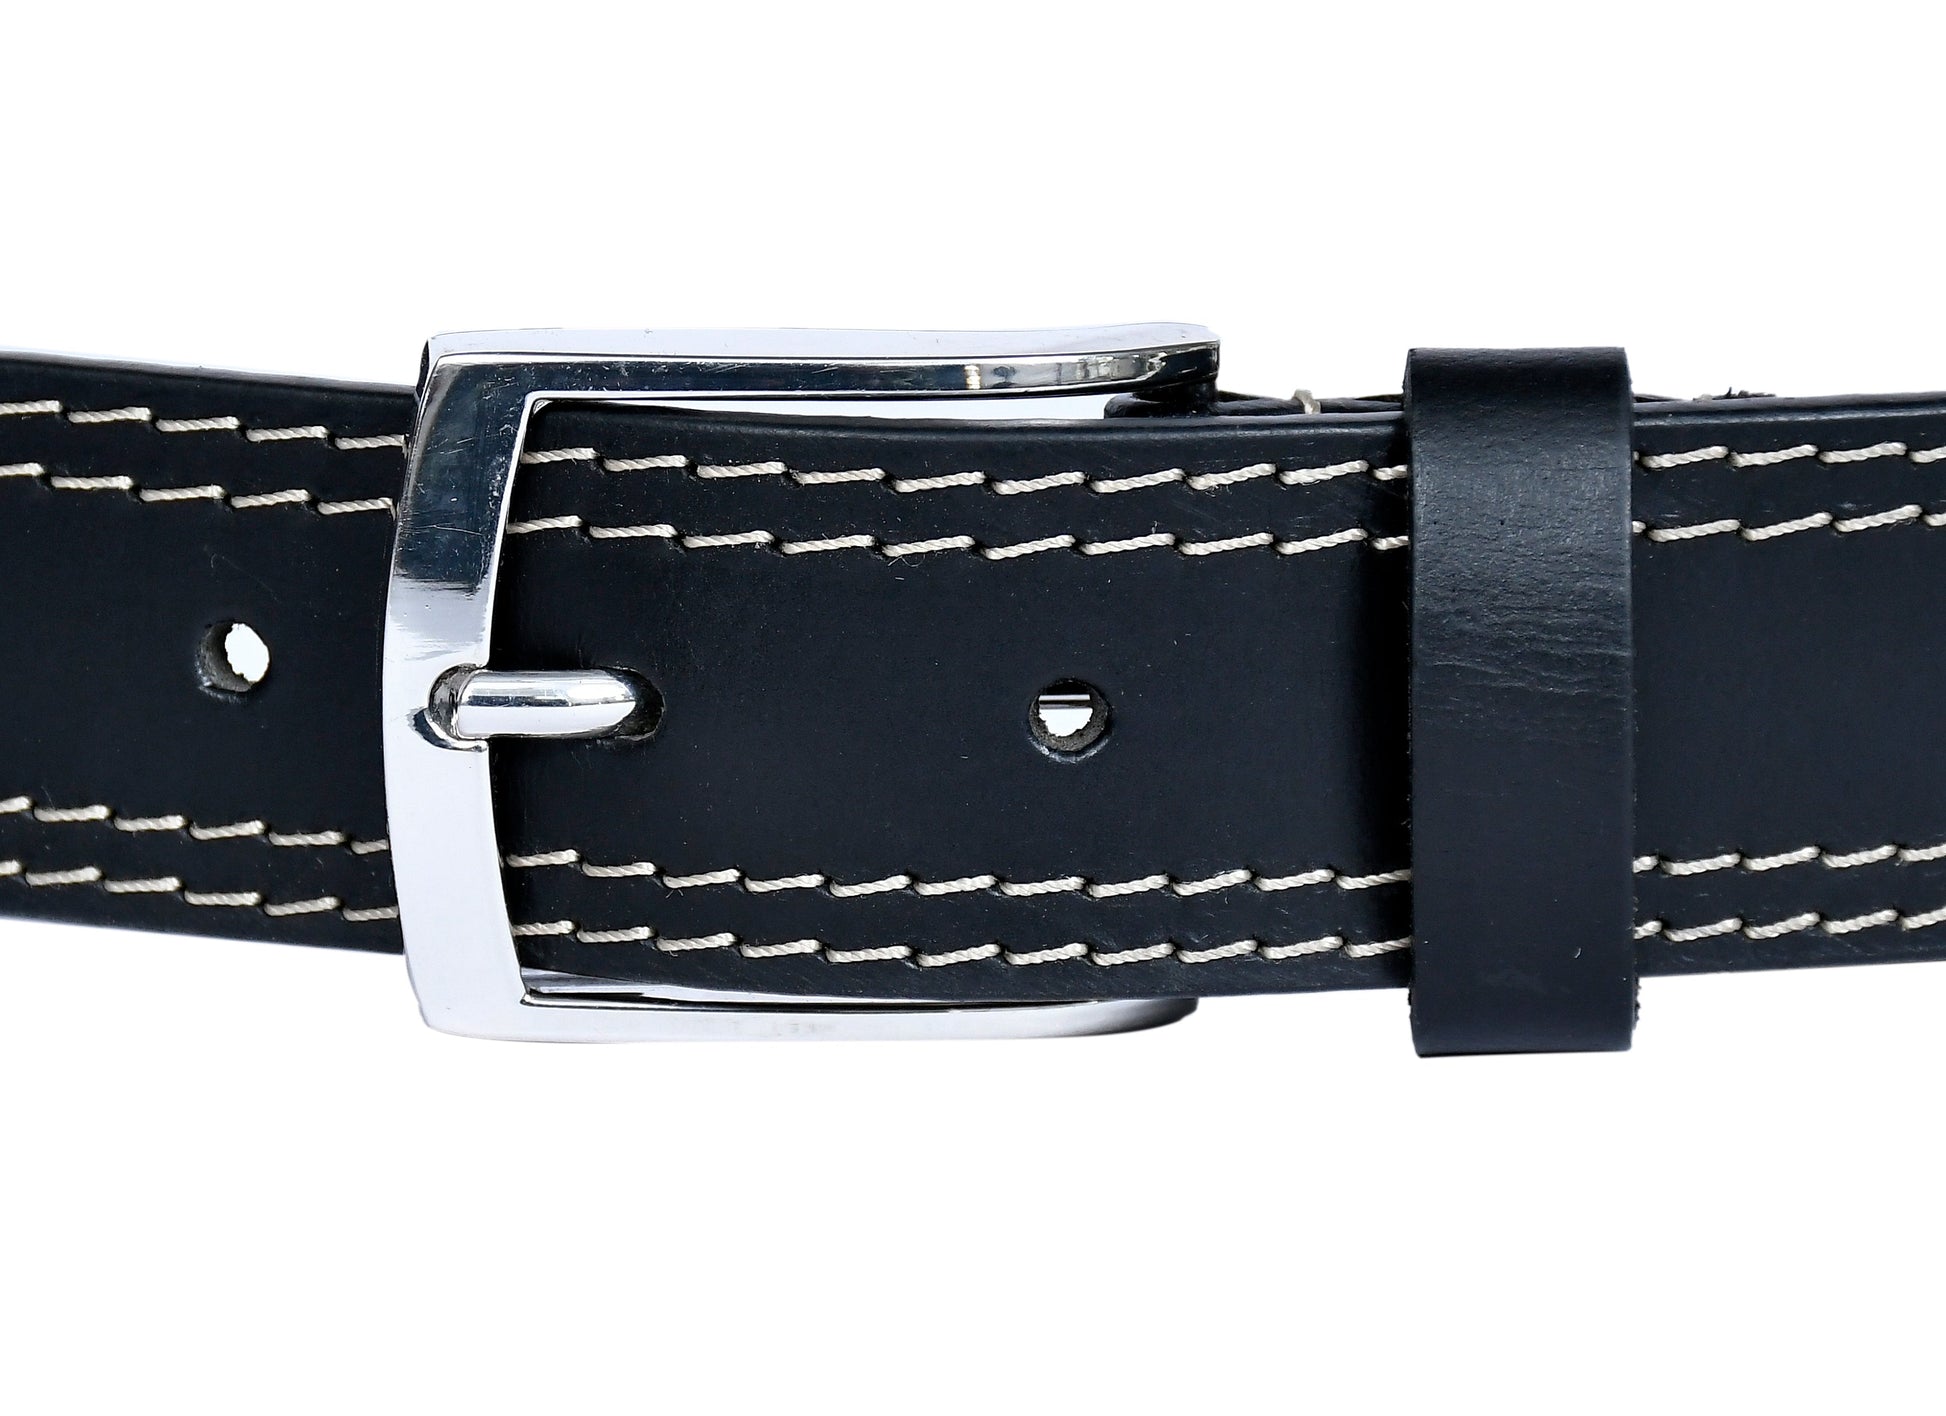 Introducing our "Eclipse Noir" Black Leather Belt with White Stitching. - CELTICINDIA